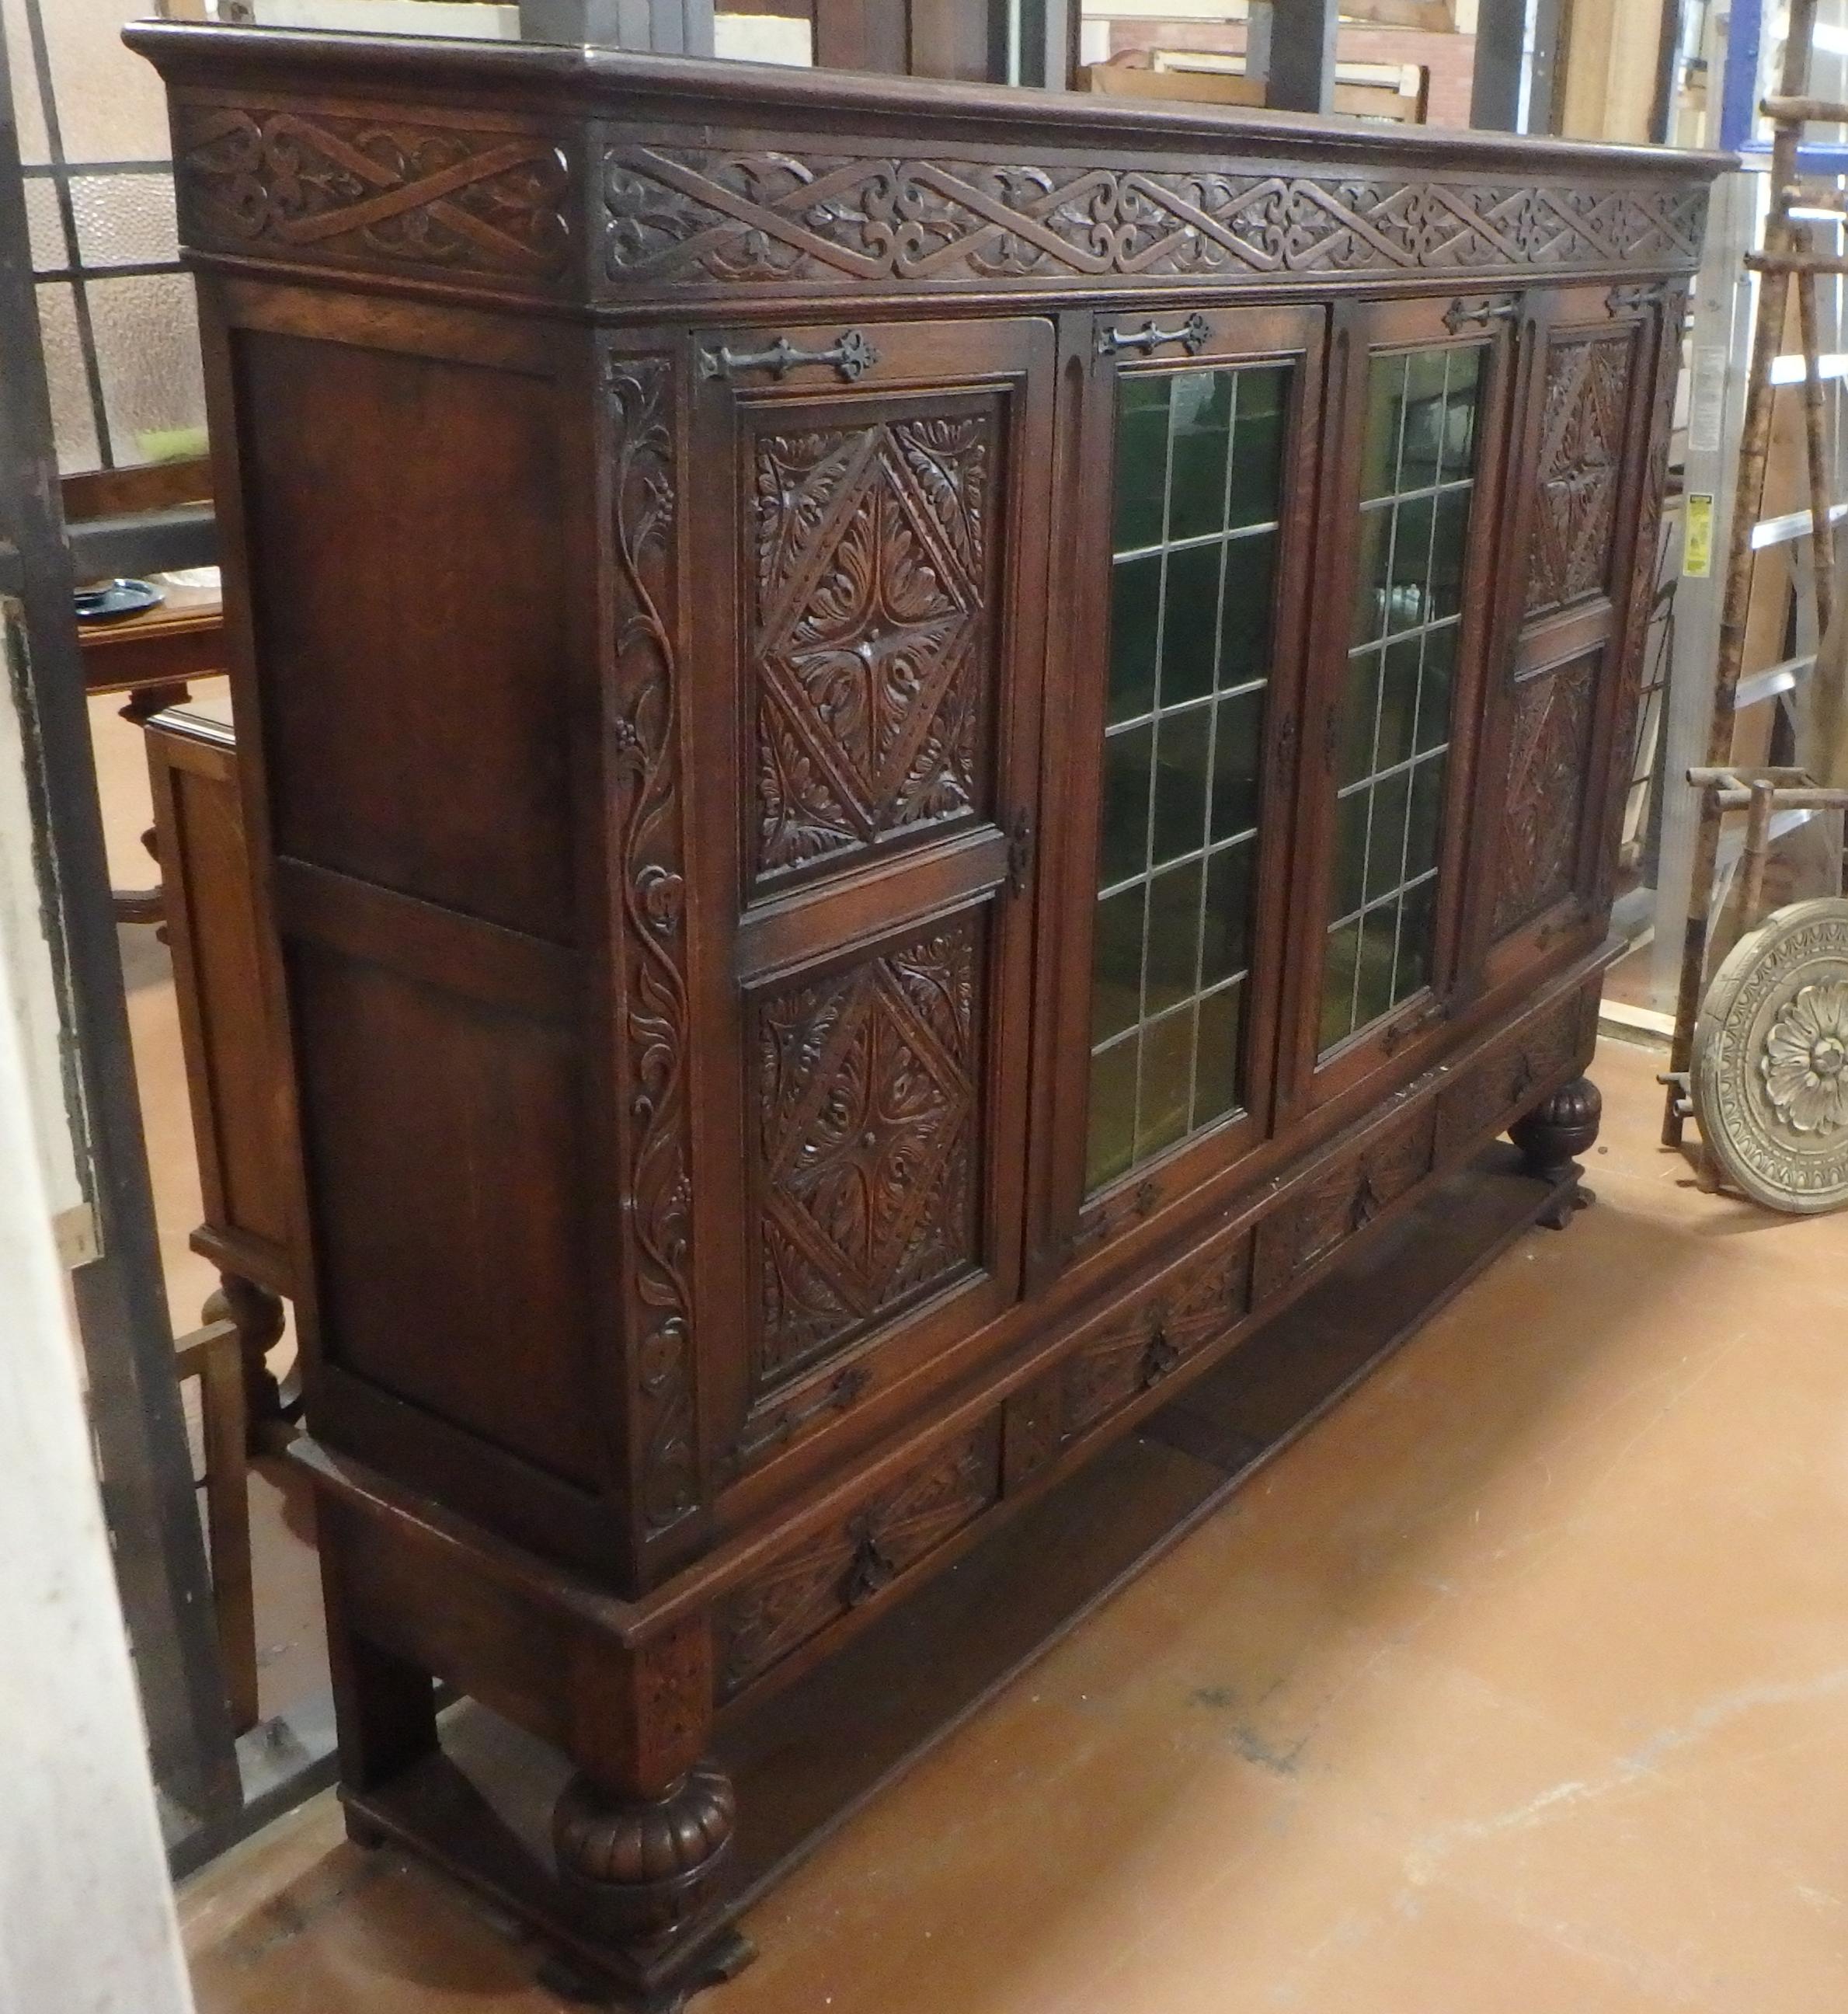 French Tudor style bookcase cabinet circa 1900 with deep hand carving and green leaded glass doors.